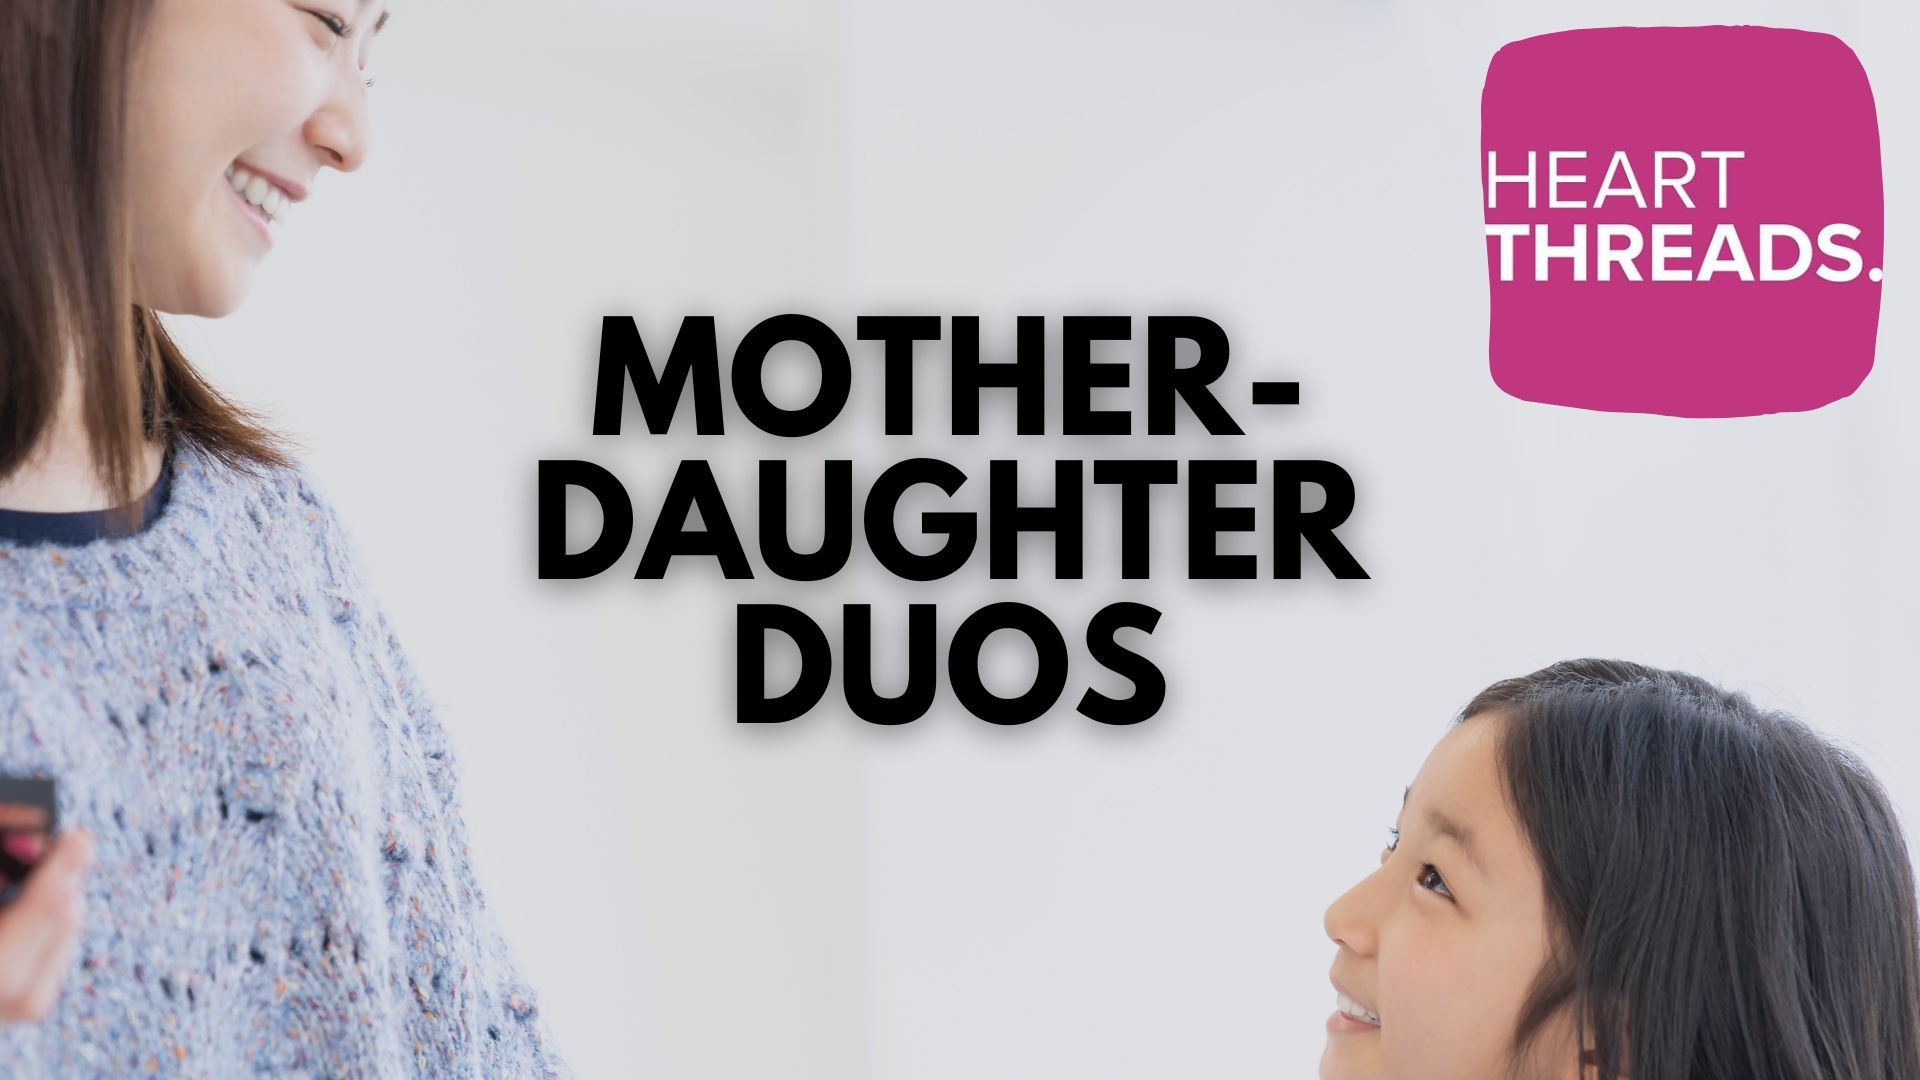 Stories focusing on strong mother-daughter duos and what bonds them together, as well as heartwarming stories of what they have achieved as a team.